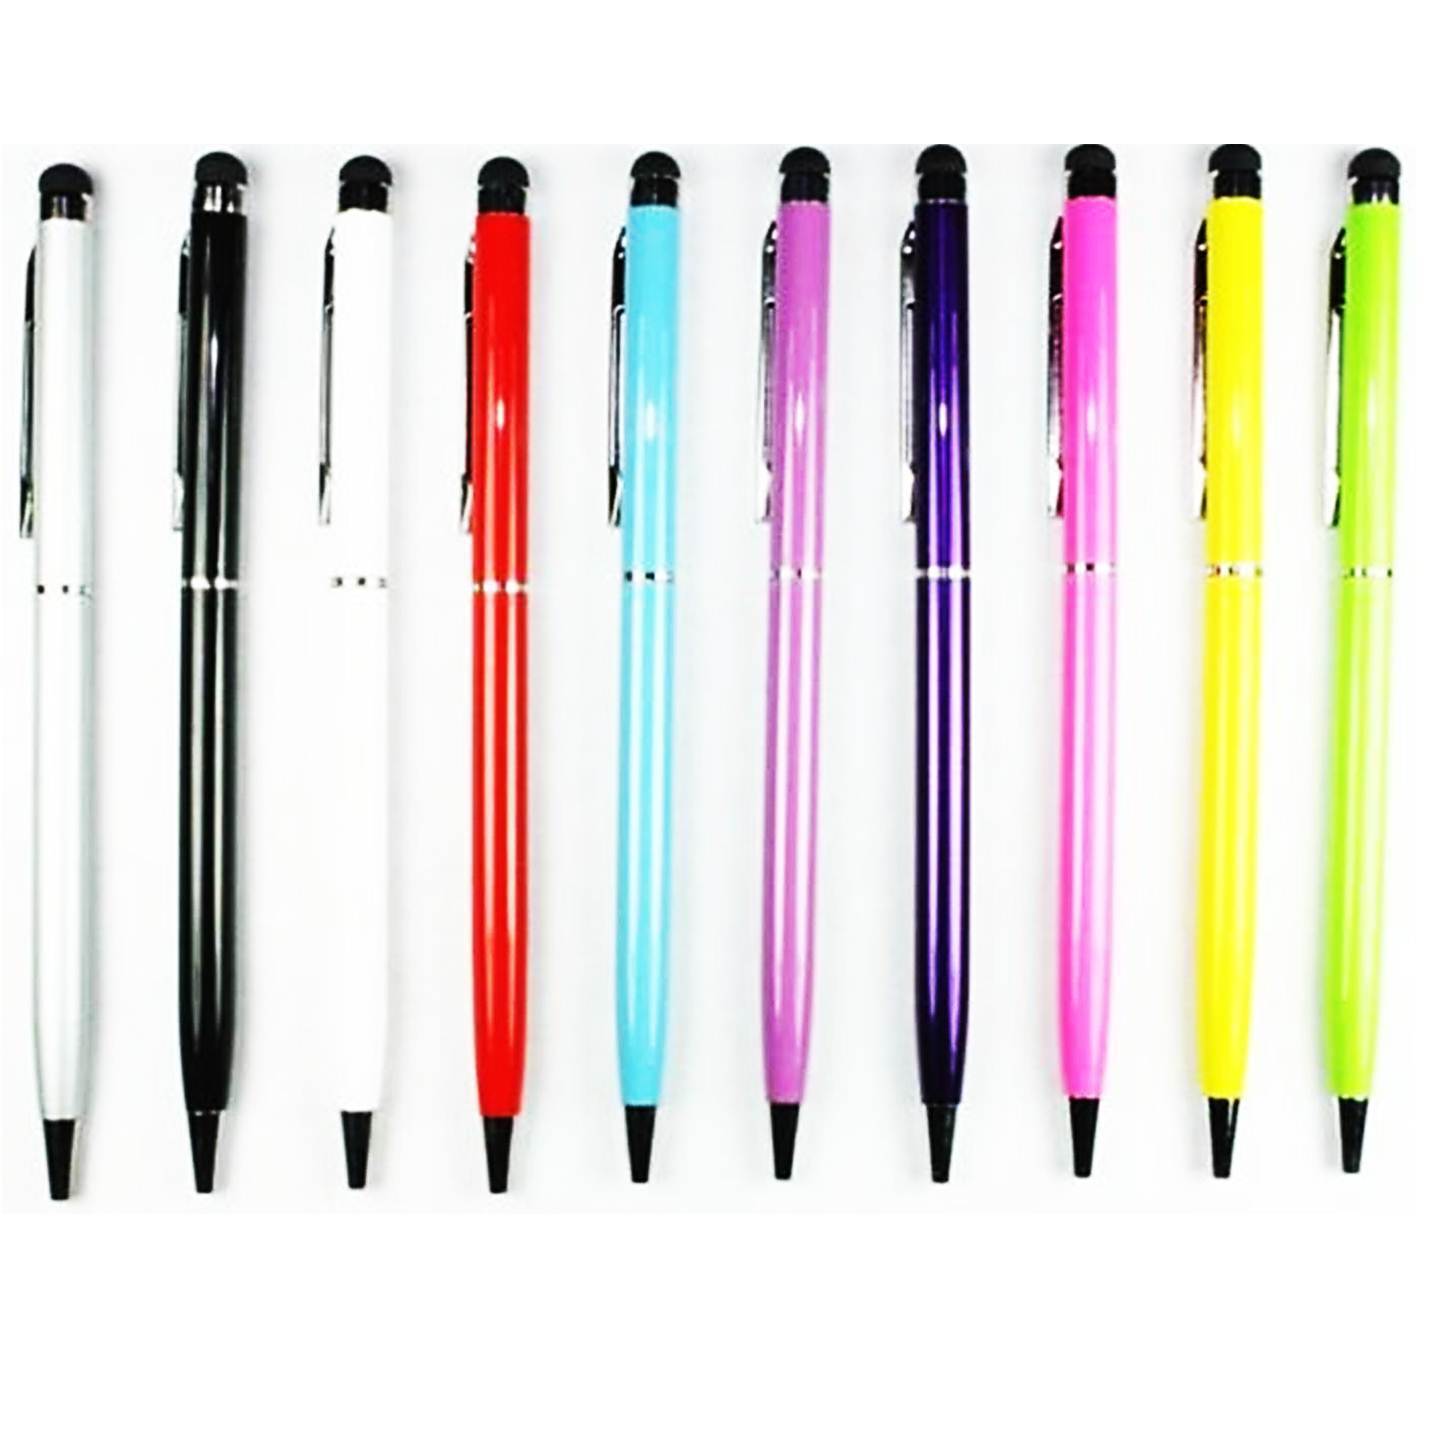 10X 2-in-1 Touch Screen Stylus + Ballpoint Pen For iPad iPhone Smartphone Tablet